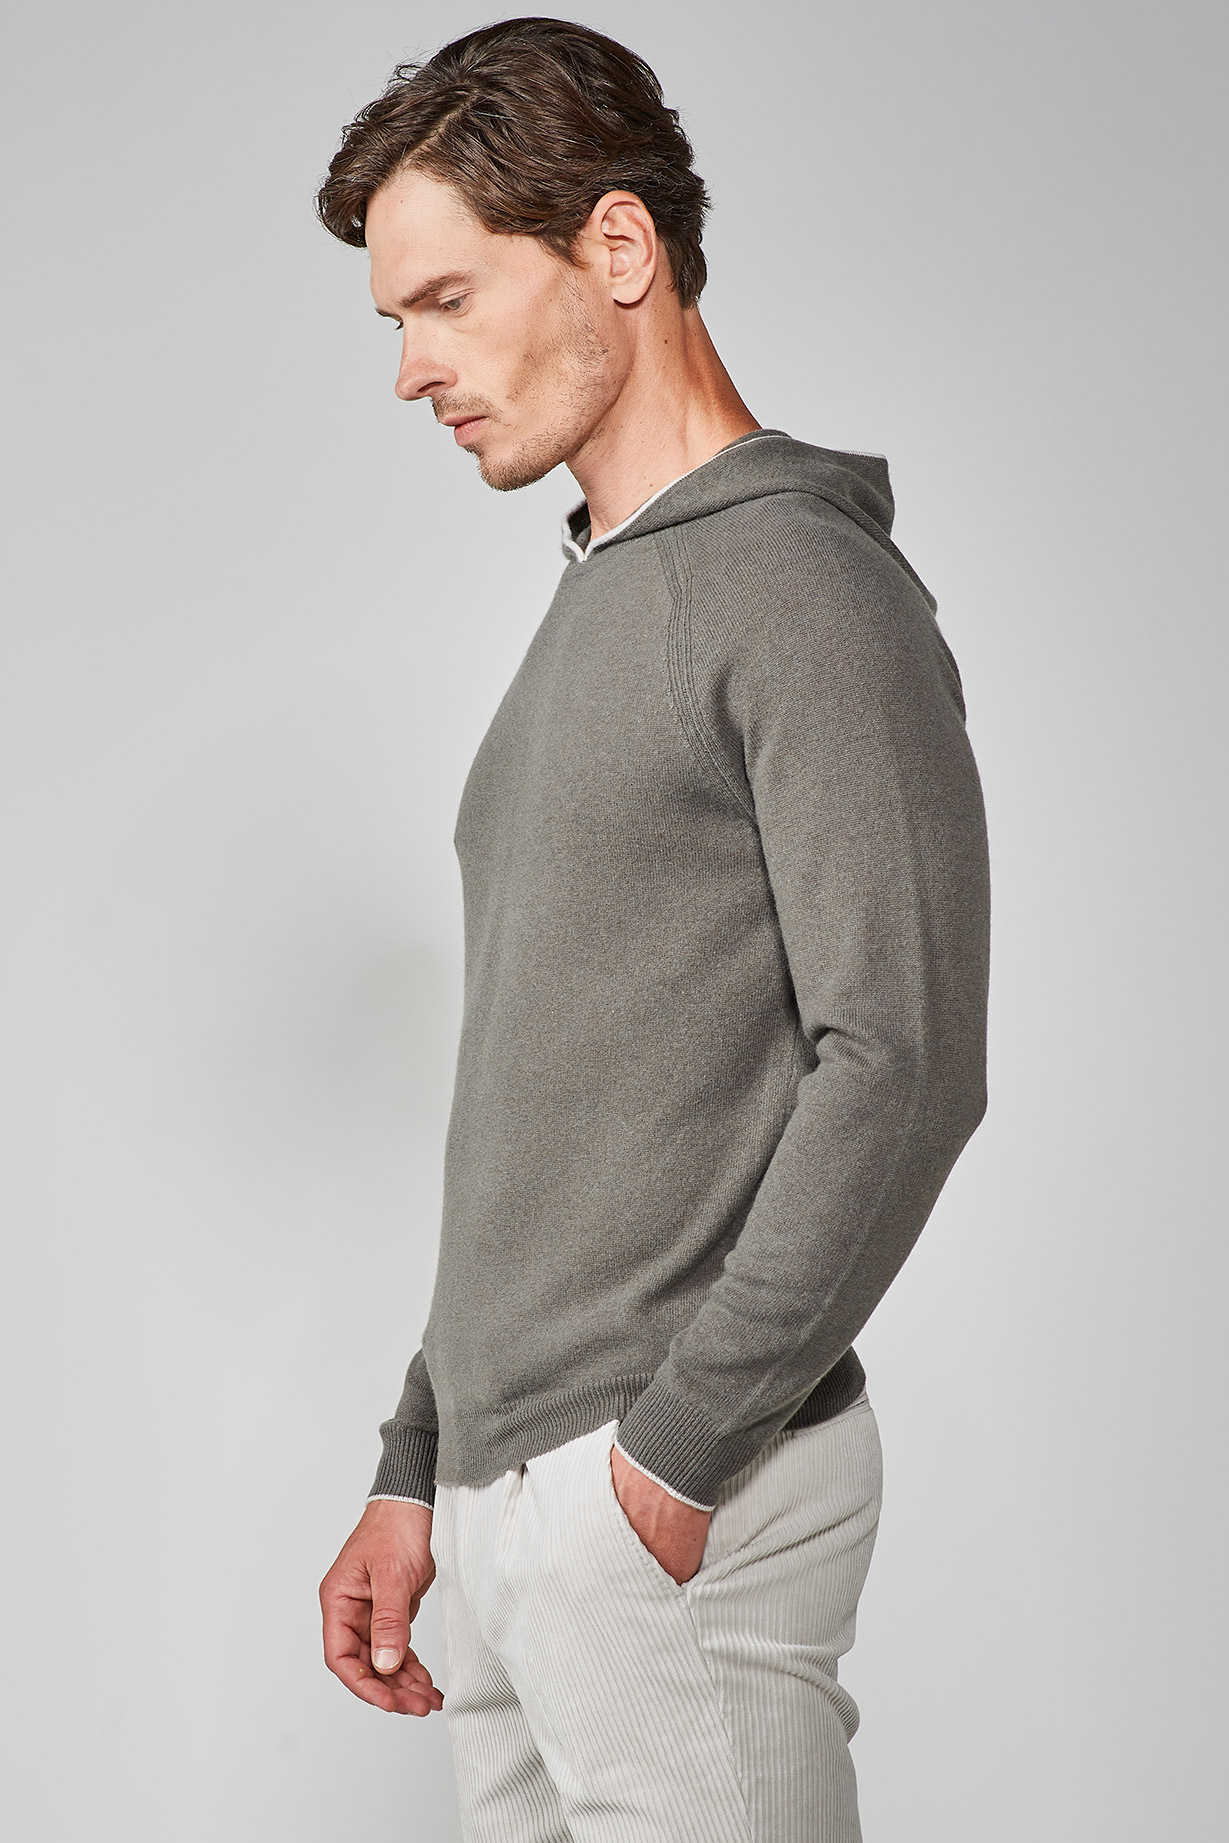 ROSEMARY GREEN CASHMERE BLEND HOODED SWEATER - Paul Taylor EN